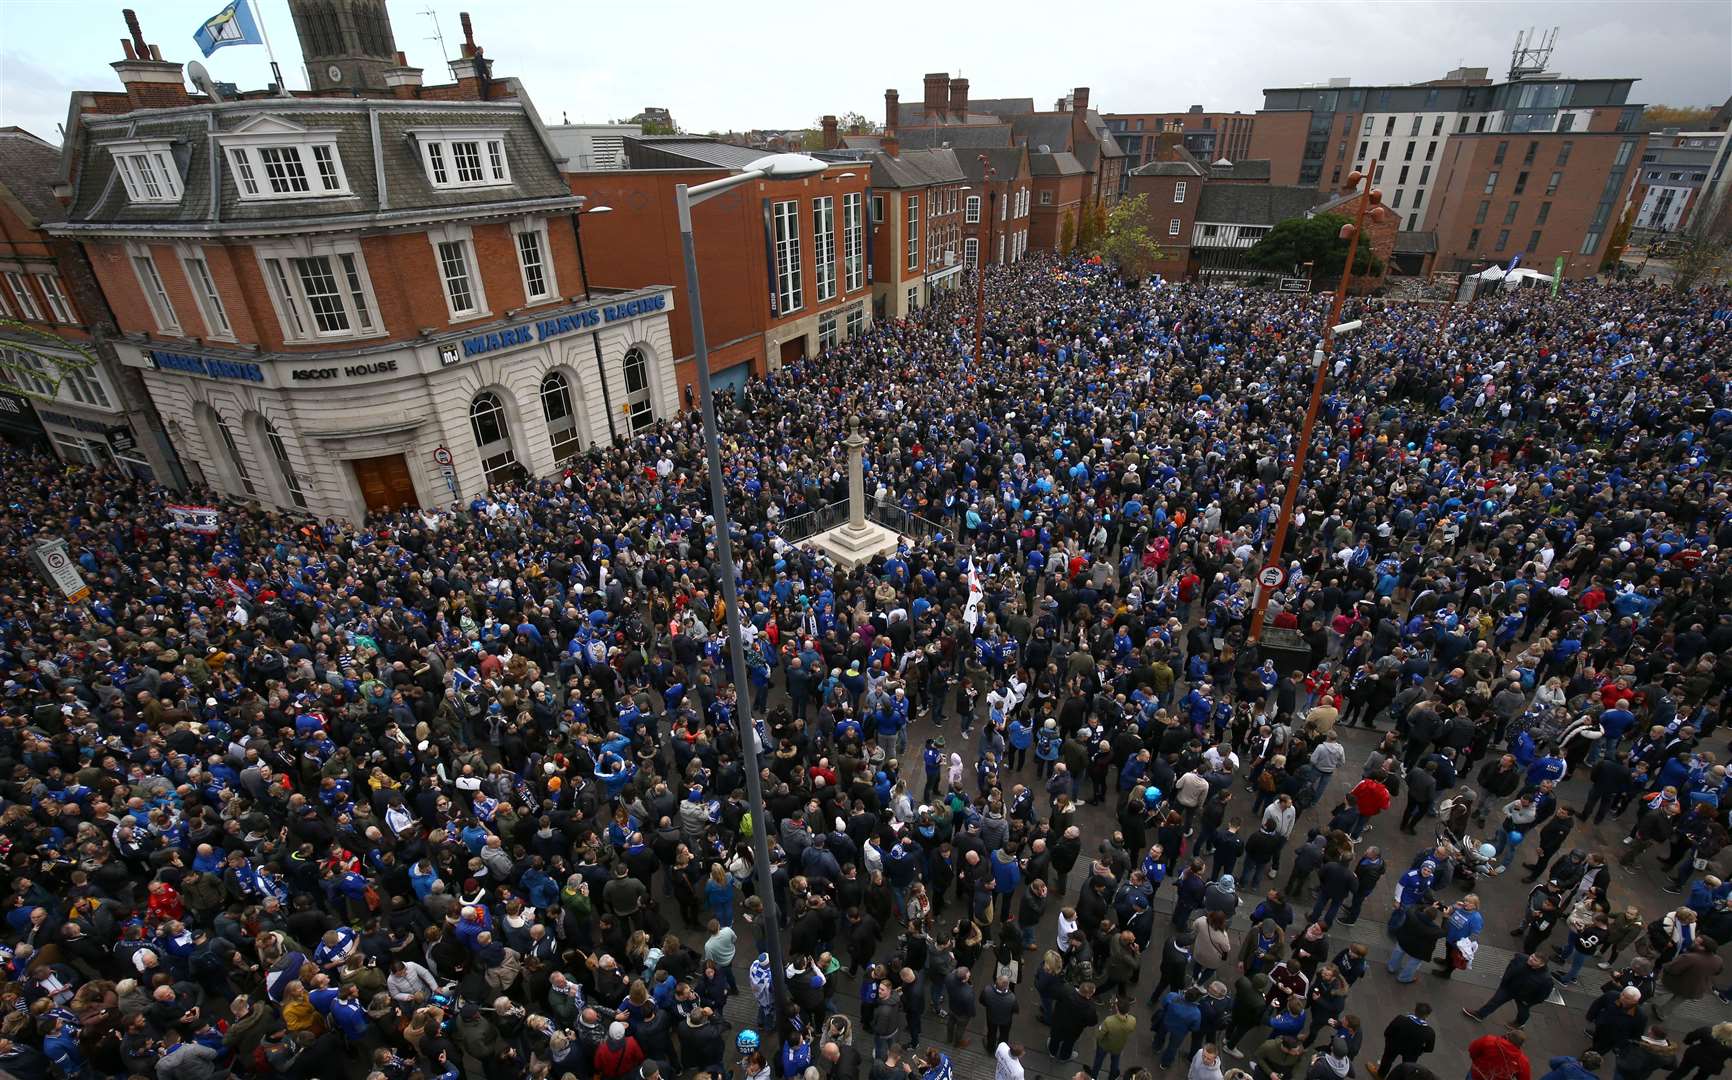 Leicester City fans took part in a memorial walk in honour of Vichai Srivaddhanaprabha and four others who died in the crash (Aaron Chown/PA)